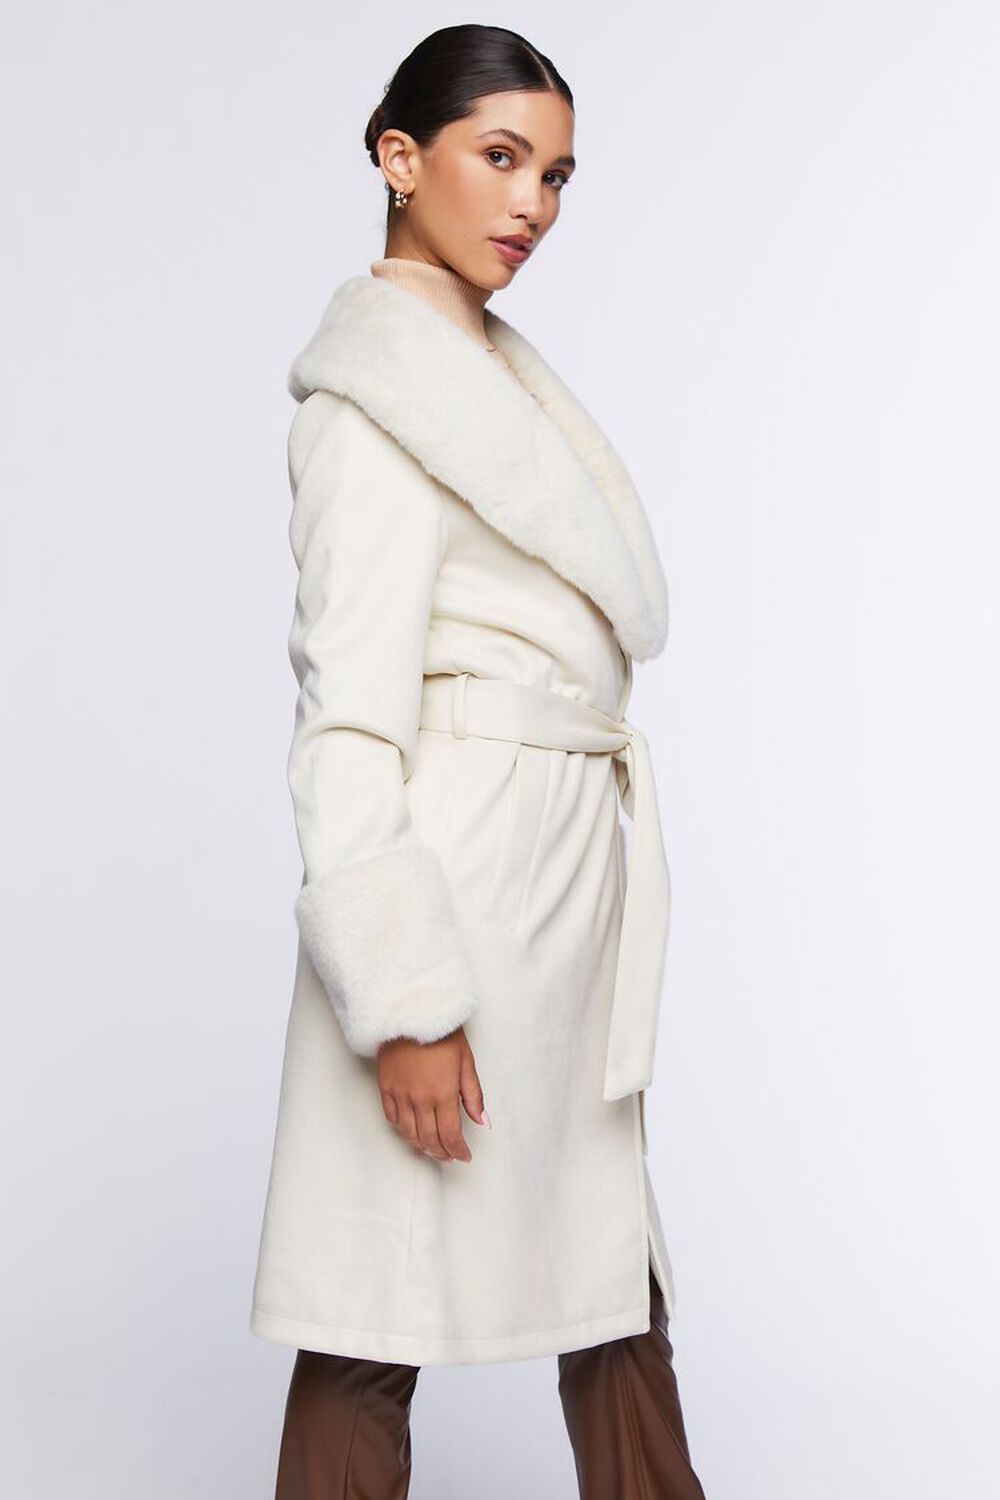 NATURAL Faux Fur-Trim Belted Trench Coat, image 2